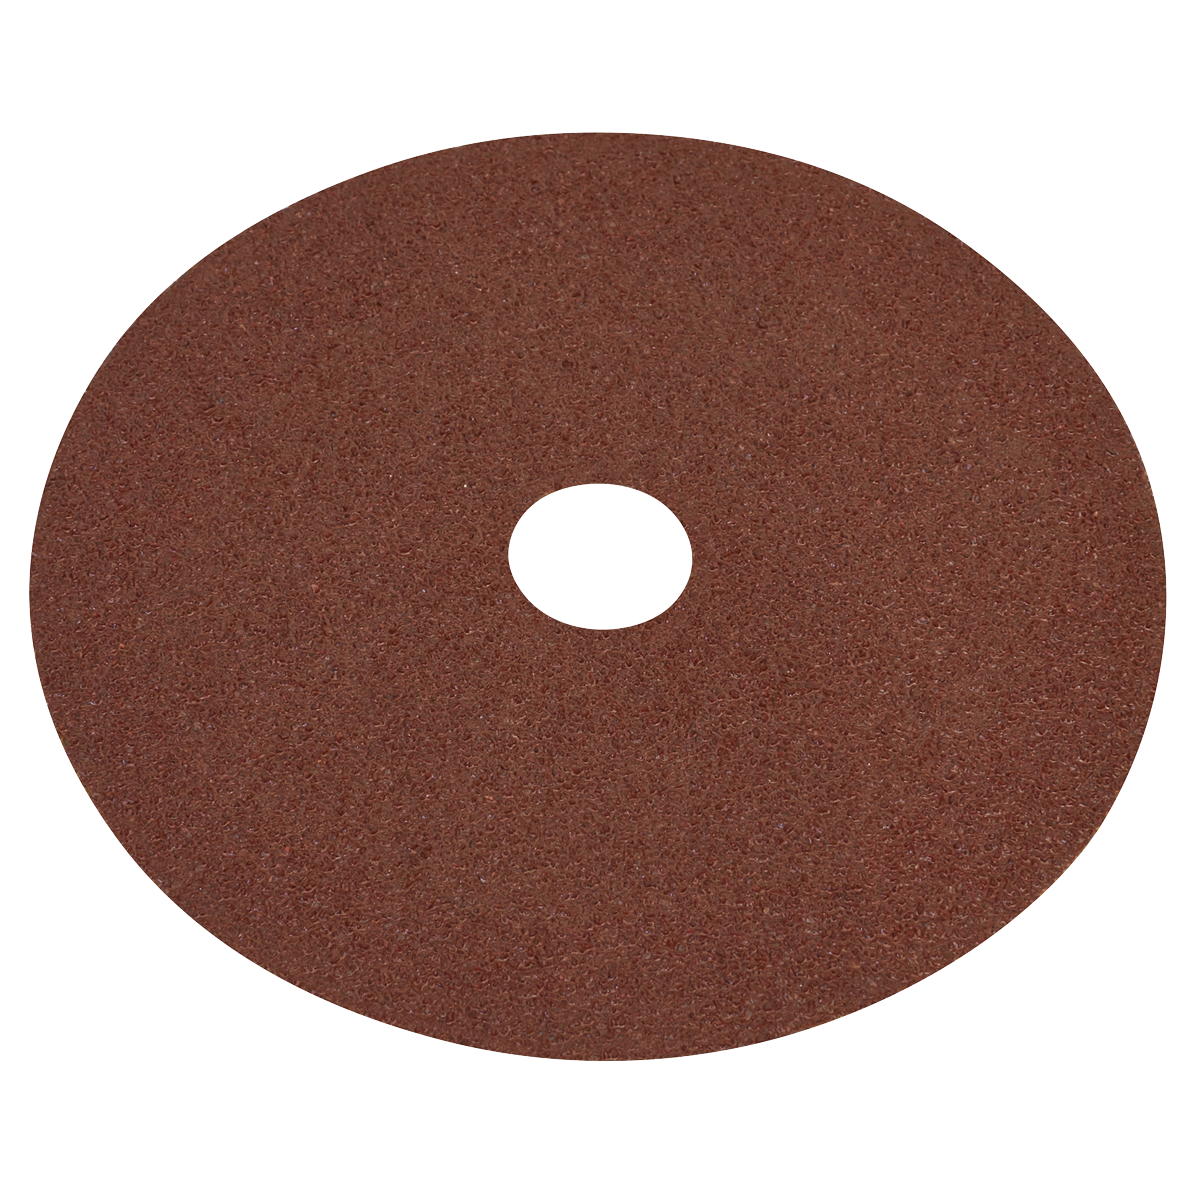 Fibre Backed Disc Ø115mm - 40Grit Pack of 25 - WSD4540 - Farming Parts